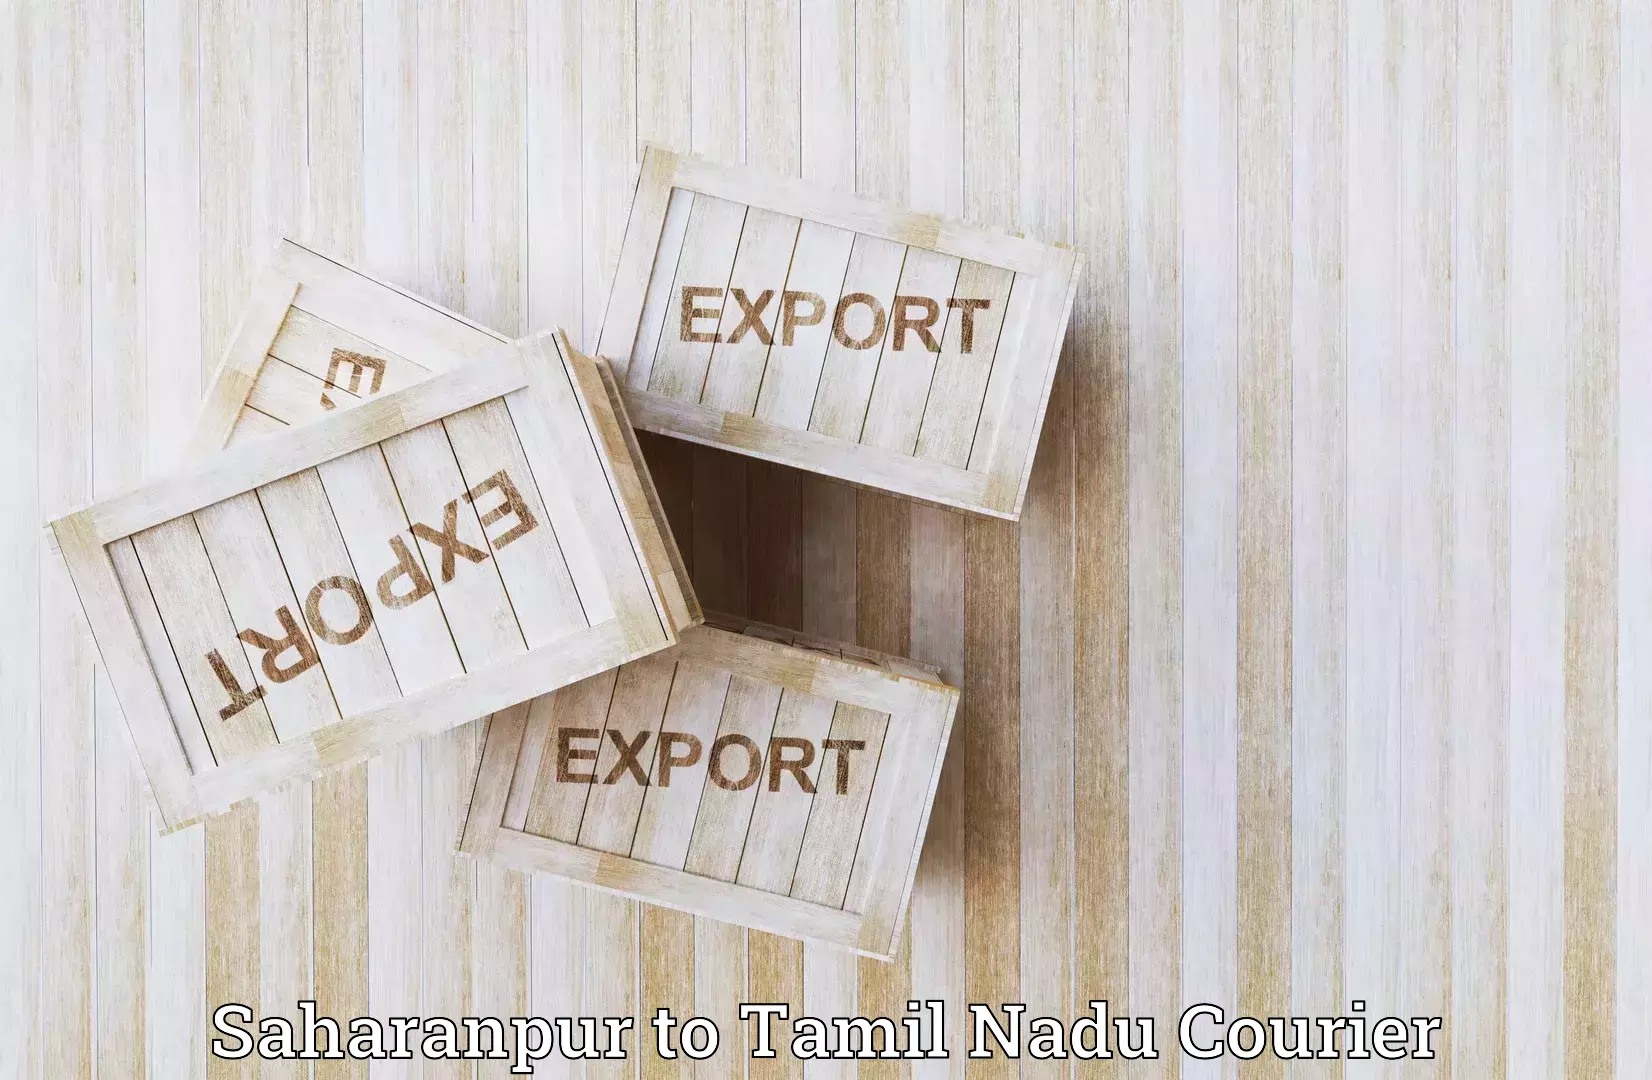 Global courier networks Saharanpur to Ayyampettai